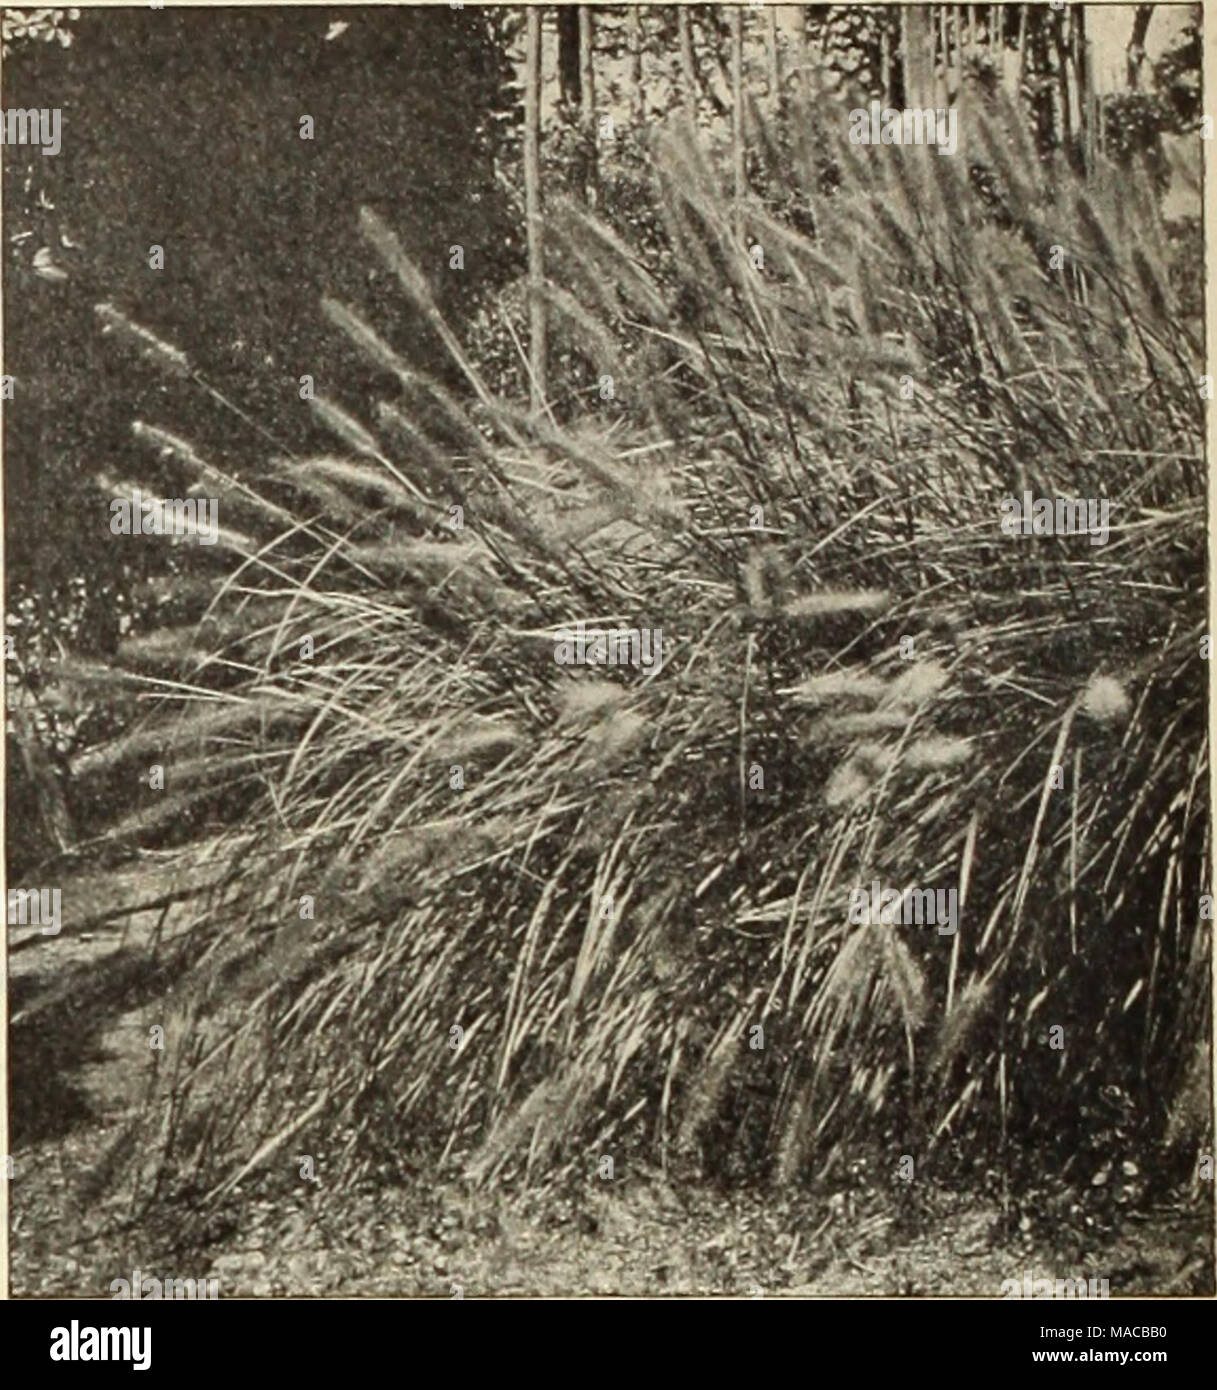 . Dreer's wholesale price list : seeds, plants, bulbs, etc . PENNISETUM JAPONICUM (Hardy Founlain Grass). Geum (Avens). Perdoz. Per 100 Atrosangulneum. 3-ineh pots $1 00 $7 00 Cocclneum. 3-inch pots 100 700 Mrs. Bradshaw iNewl. 3-inch pots 1 50 10 00 Giilenia (Bowman's Root). TrIfollaU 2 00 15 00 Glechoma or Nepeta. VarleKata (Variegated Groundsel or Ground Ivyi. 3-inch pots 85 00 ORNAMENTAL GRASSES. These are now used very extensively for beds, specimens on lawns, etc., etc. We grow the leading varieties in large quantities. For full descriptions, see pages 219 and 220 of our Garden Book for  Stock Photo